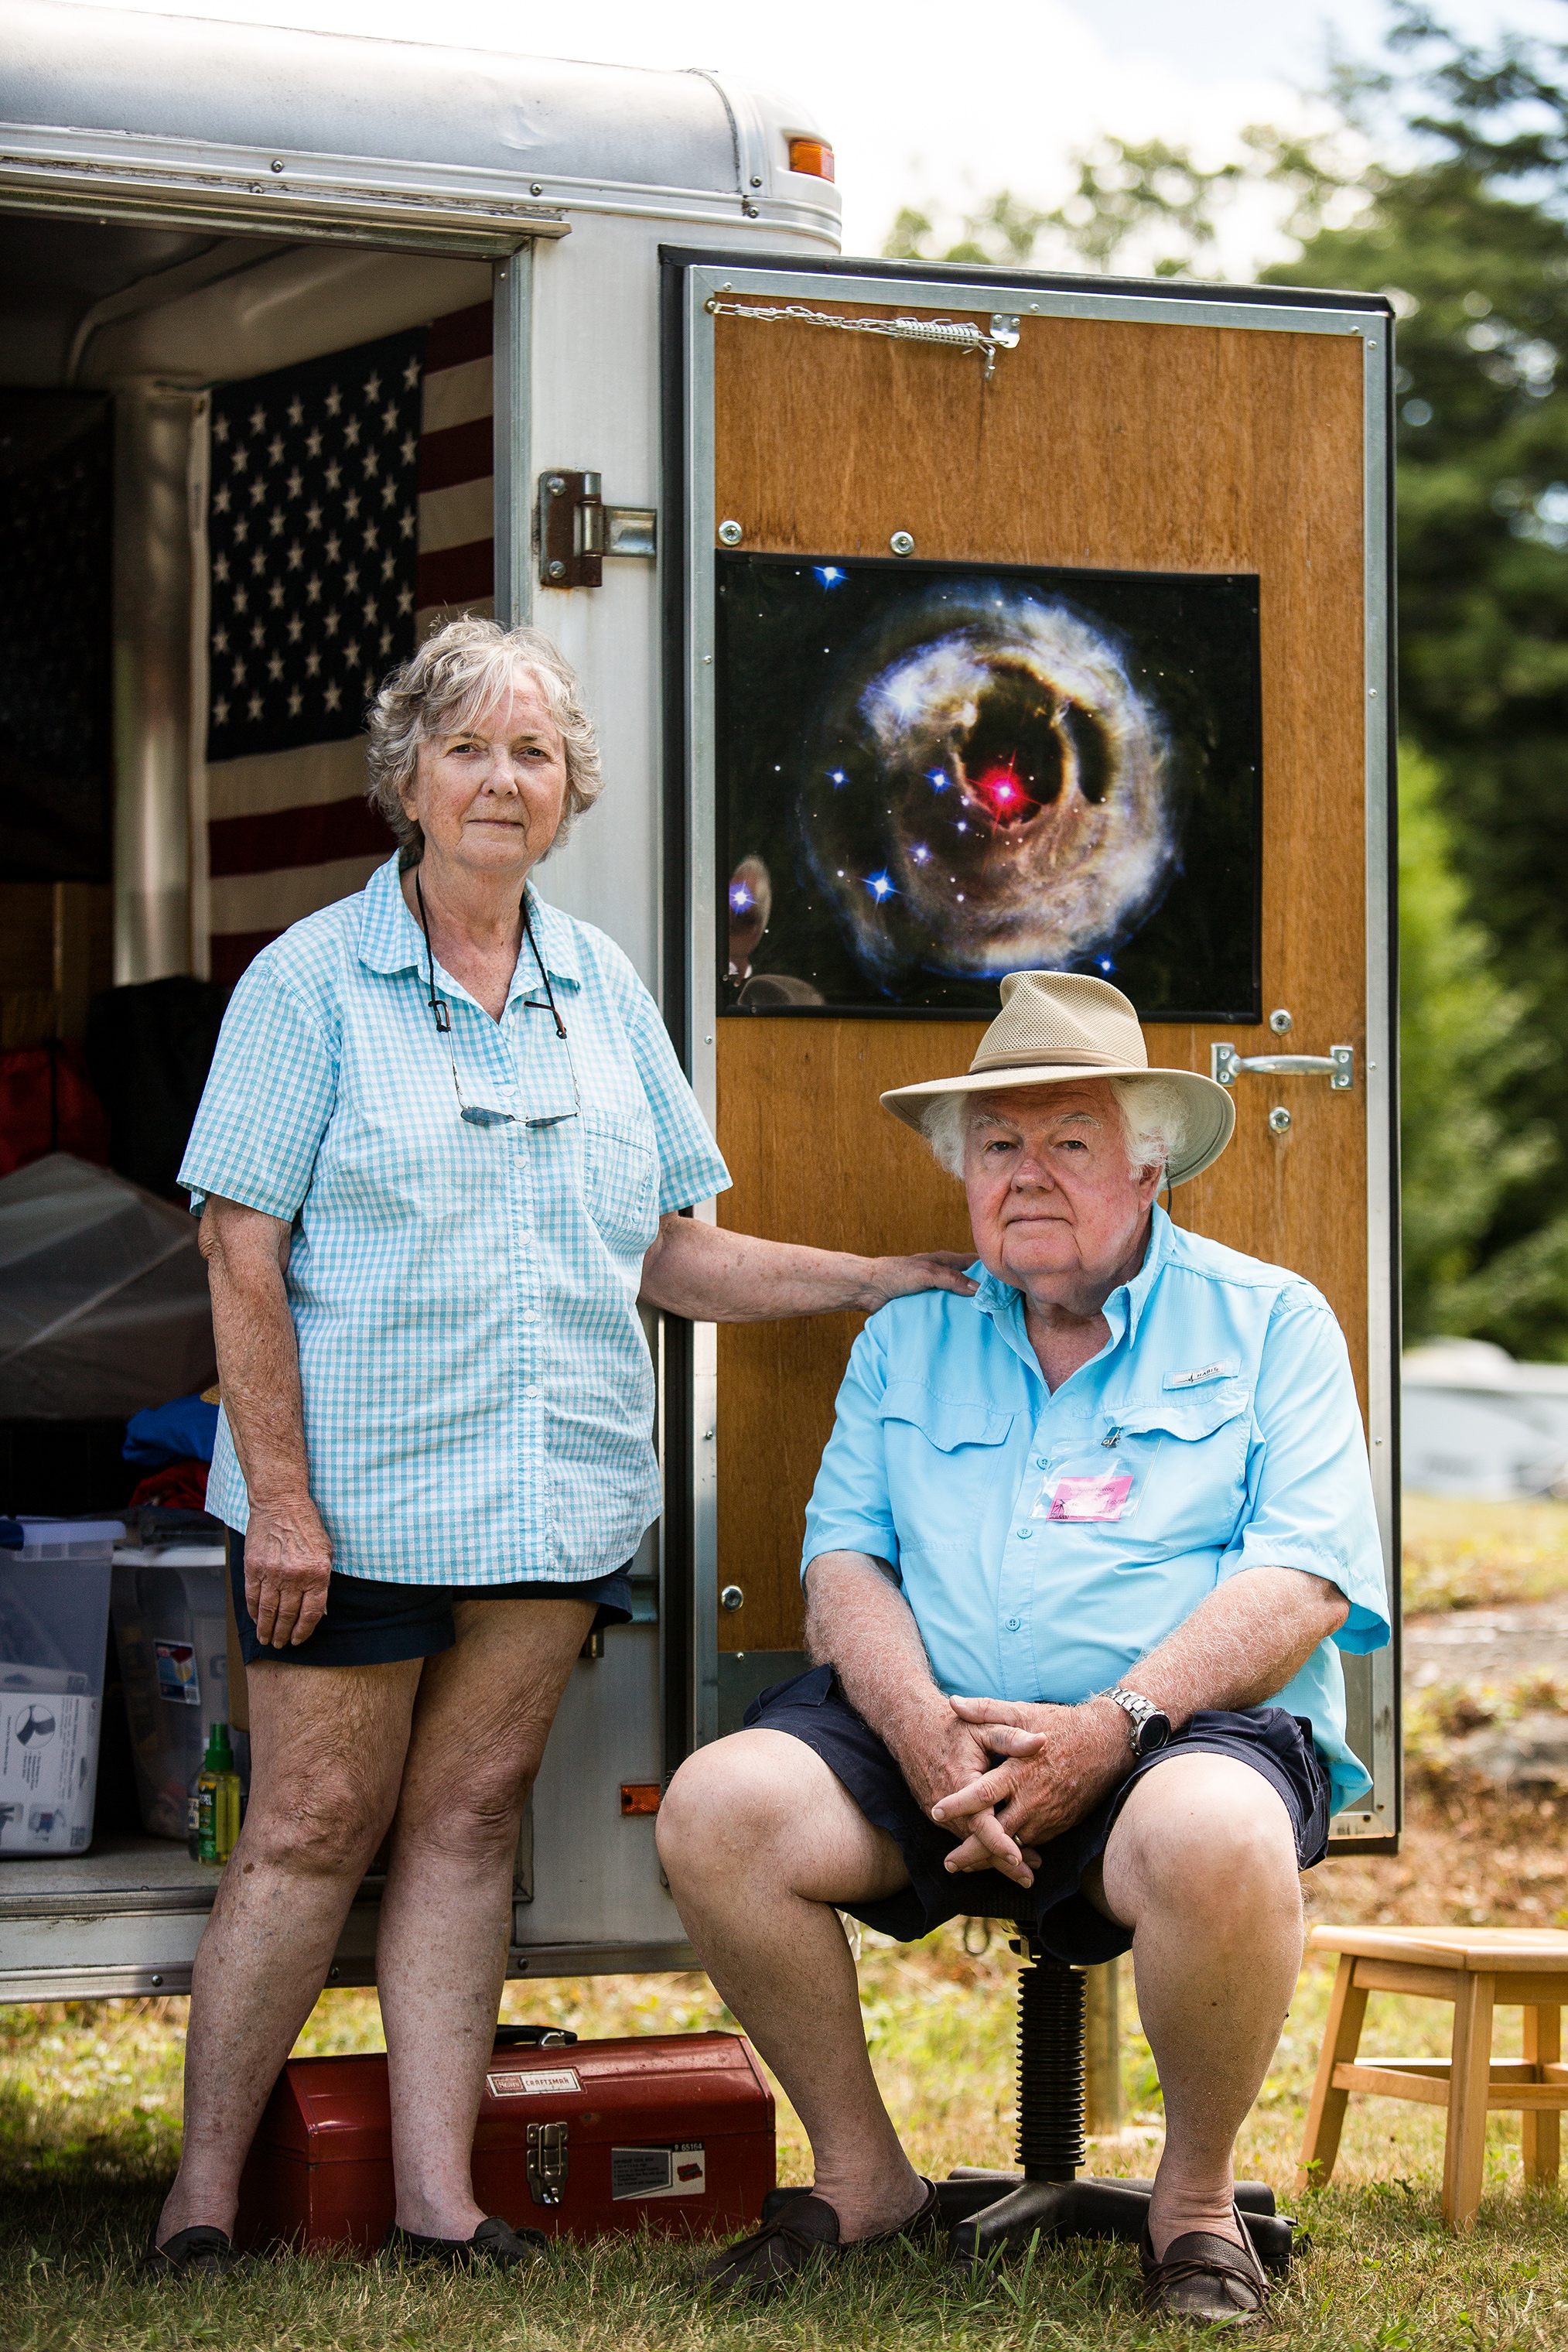 Dee and Roy Diffrient, from Monkton, Md. This is the couple's 25th year attending Stellafane. (Robert Ormerod for TIME)